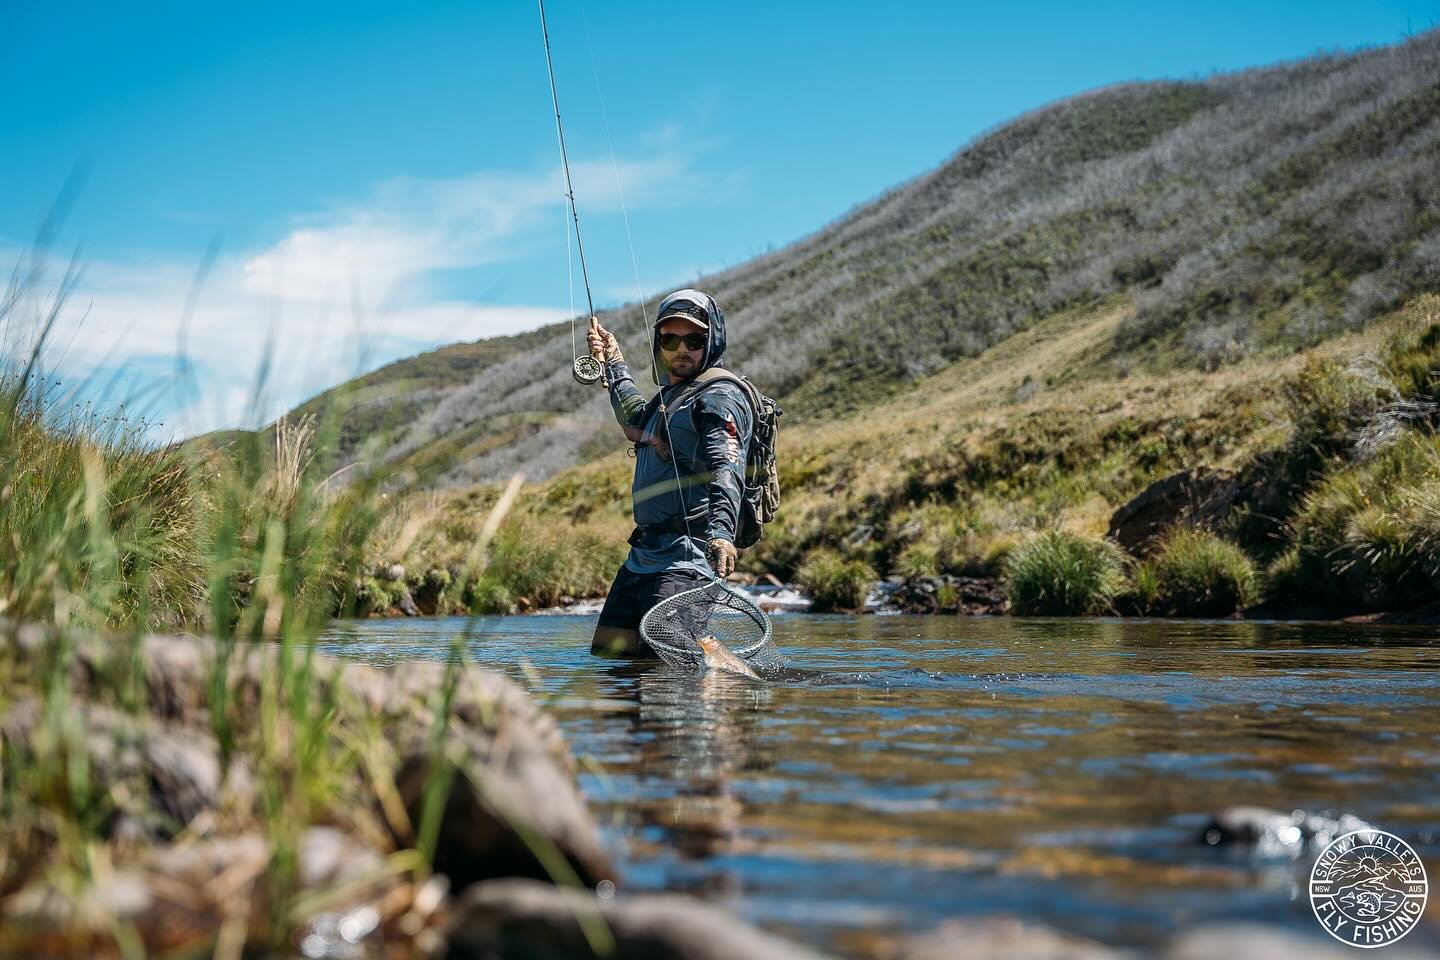 I&rsquo;ll be the first to admit that I&rsquo;m rather fond of a brown trout, maybe it&rsquo;s the Tasmanian in me&hellip; 

There is no denying however that rainbows pull like freight trains and put up a much better account of themselves, in most ca